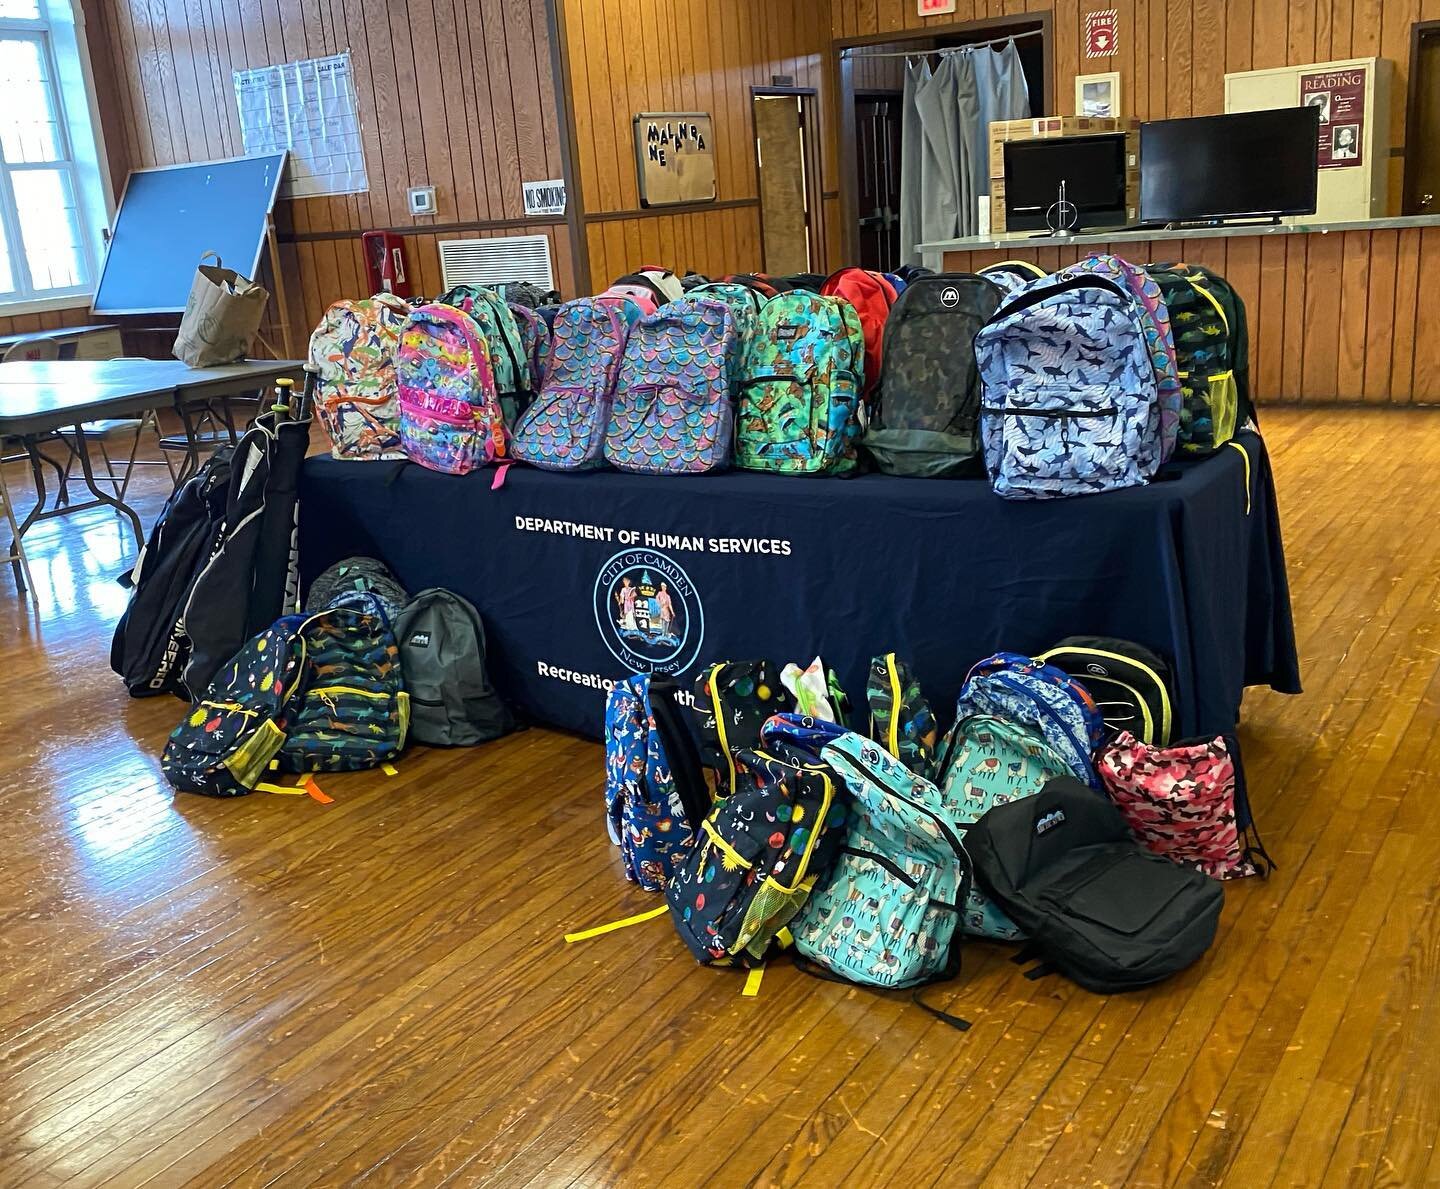 Thank you to everyone who helped us donate over 50 backpacks filled with back to school supplies along with gently used sports equipment in partnership with @heartsofskylar !! We appreciate everyone who supported this initiative for the City of Camde